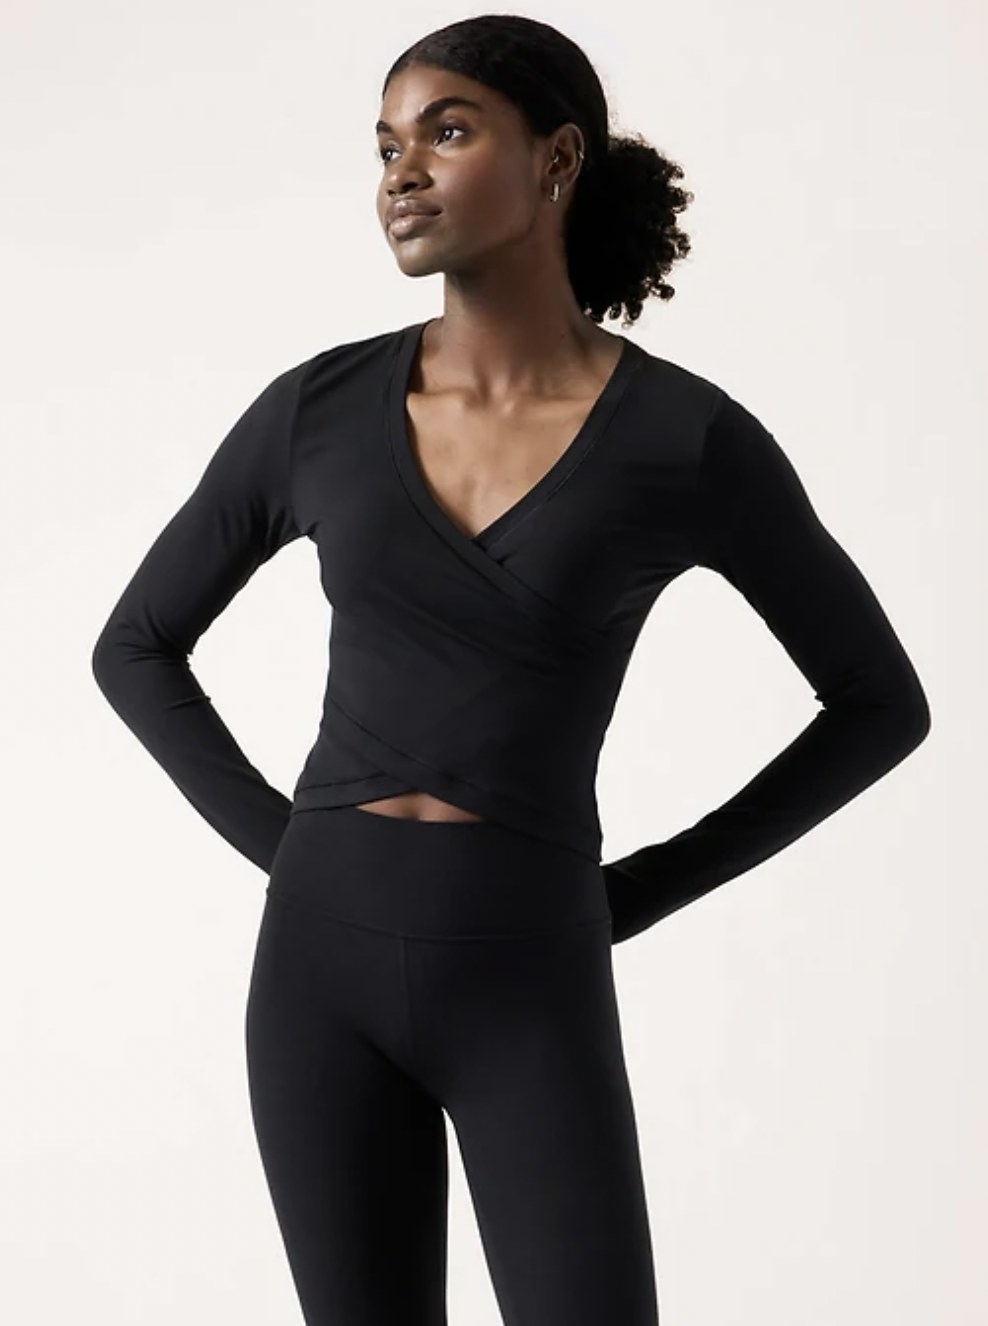 Model in the black wrap top with matching leggings